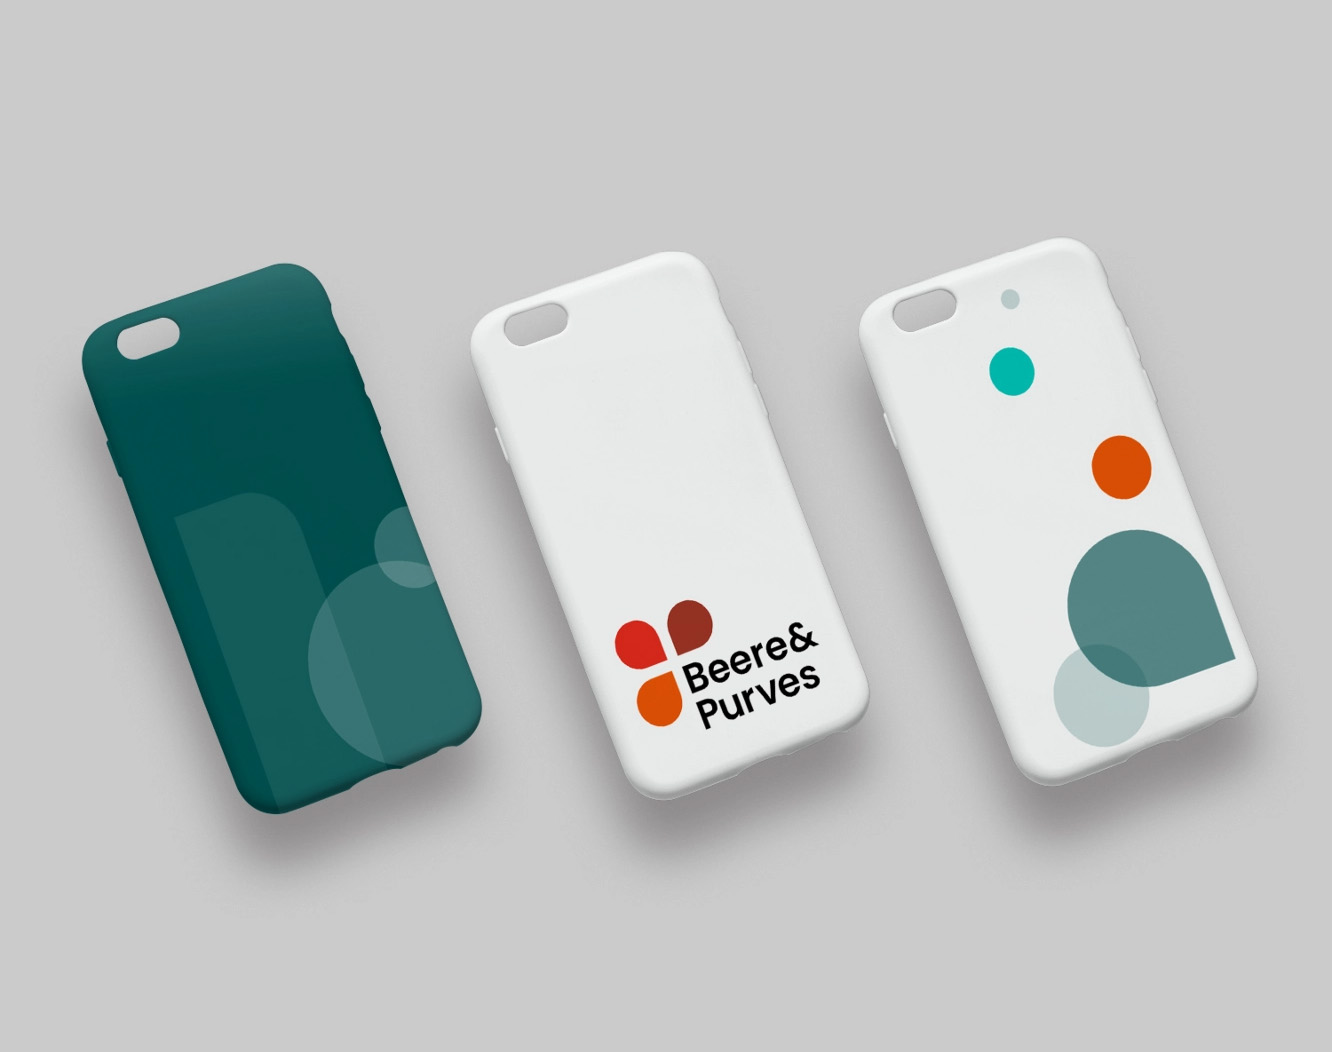 Beere Purves phone covers